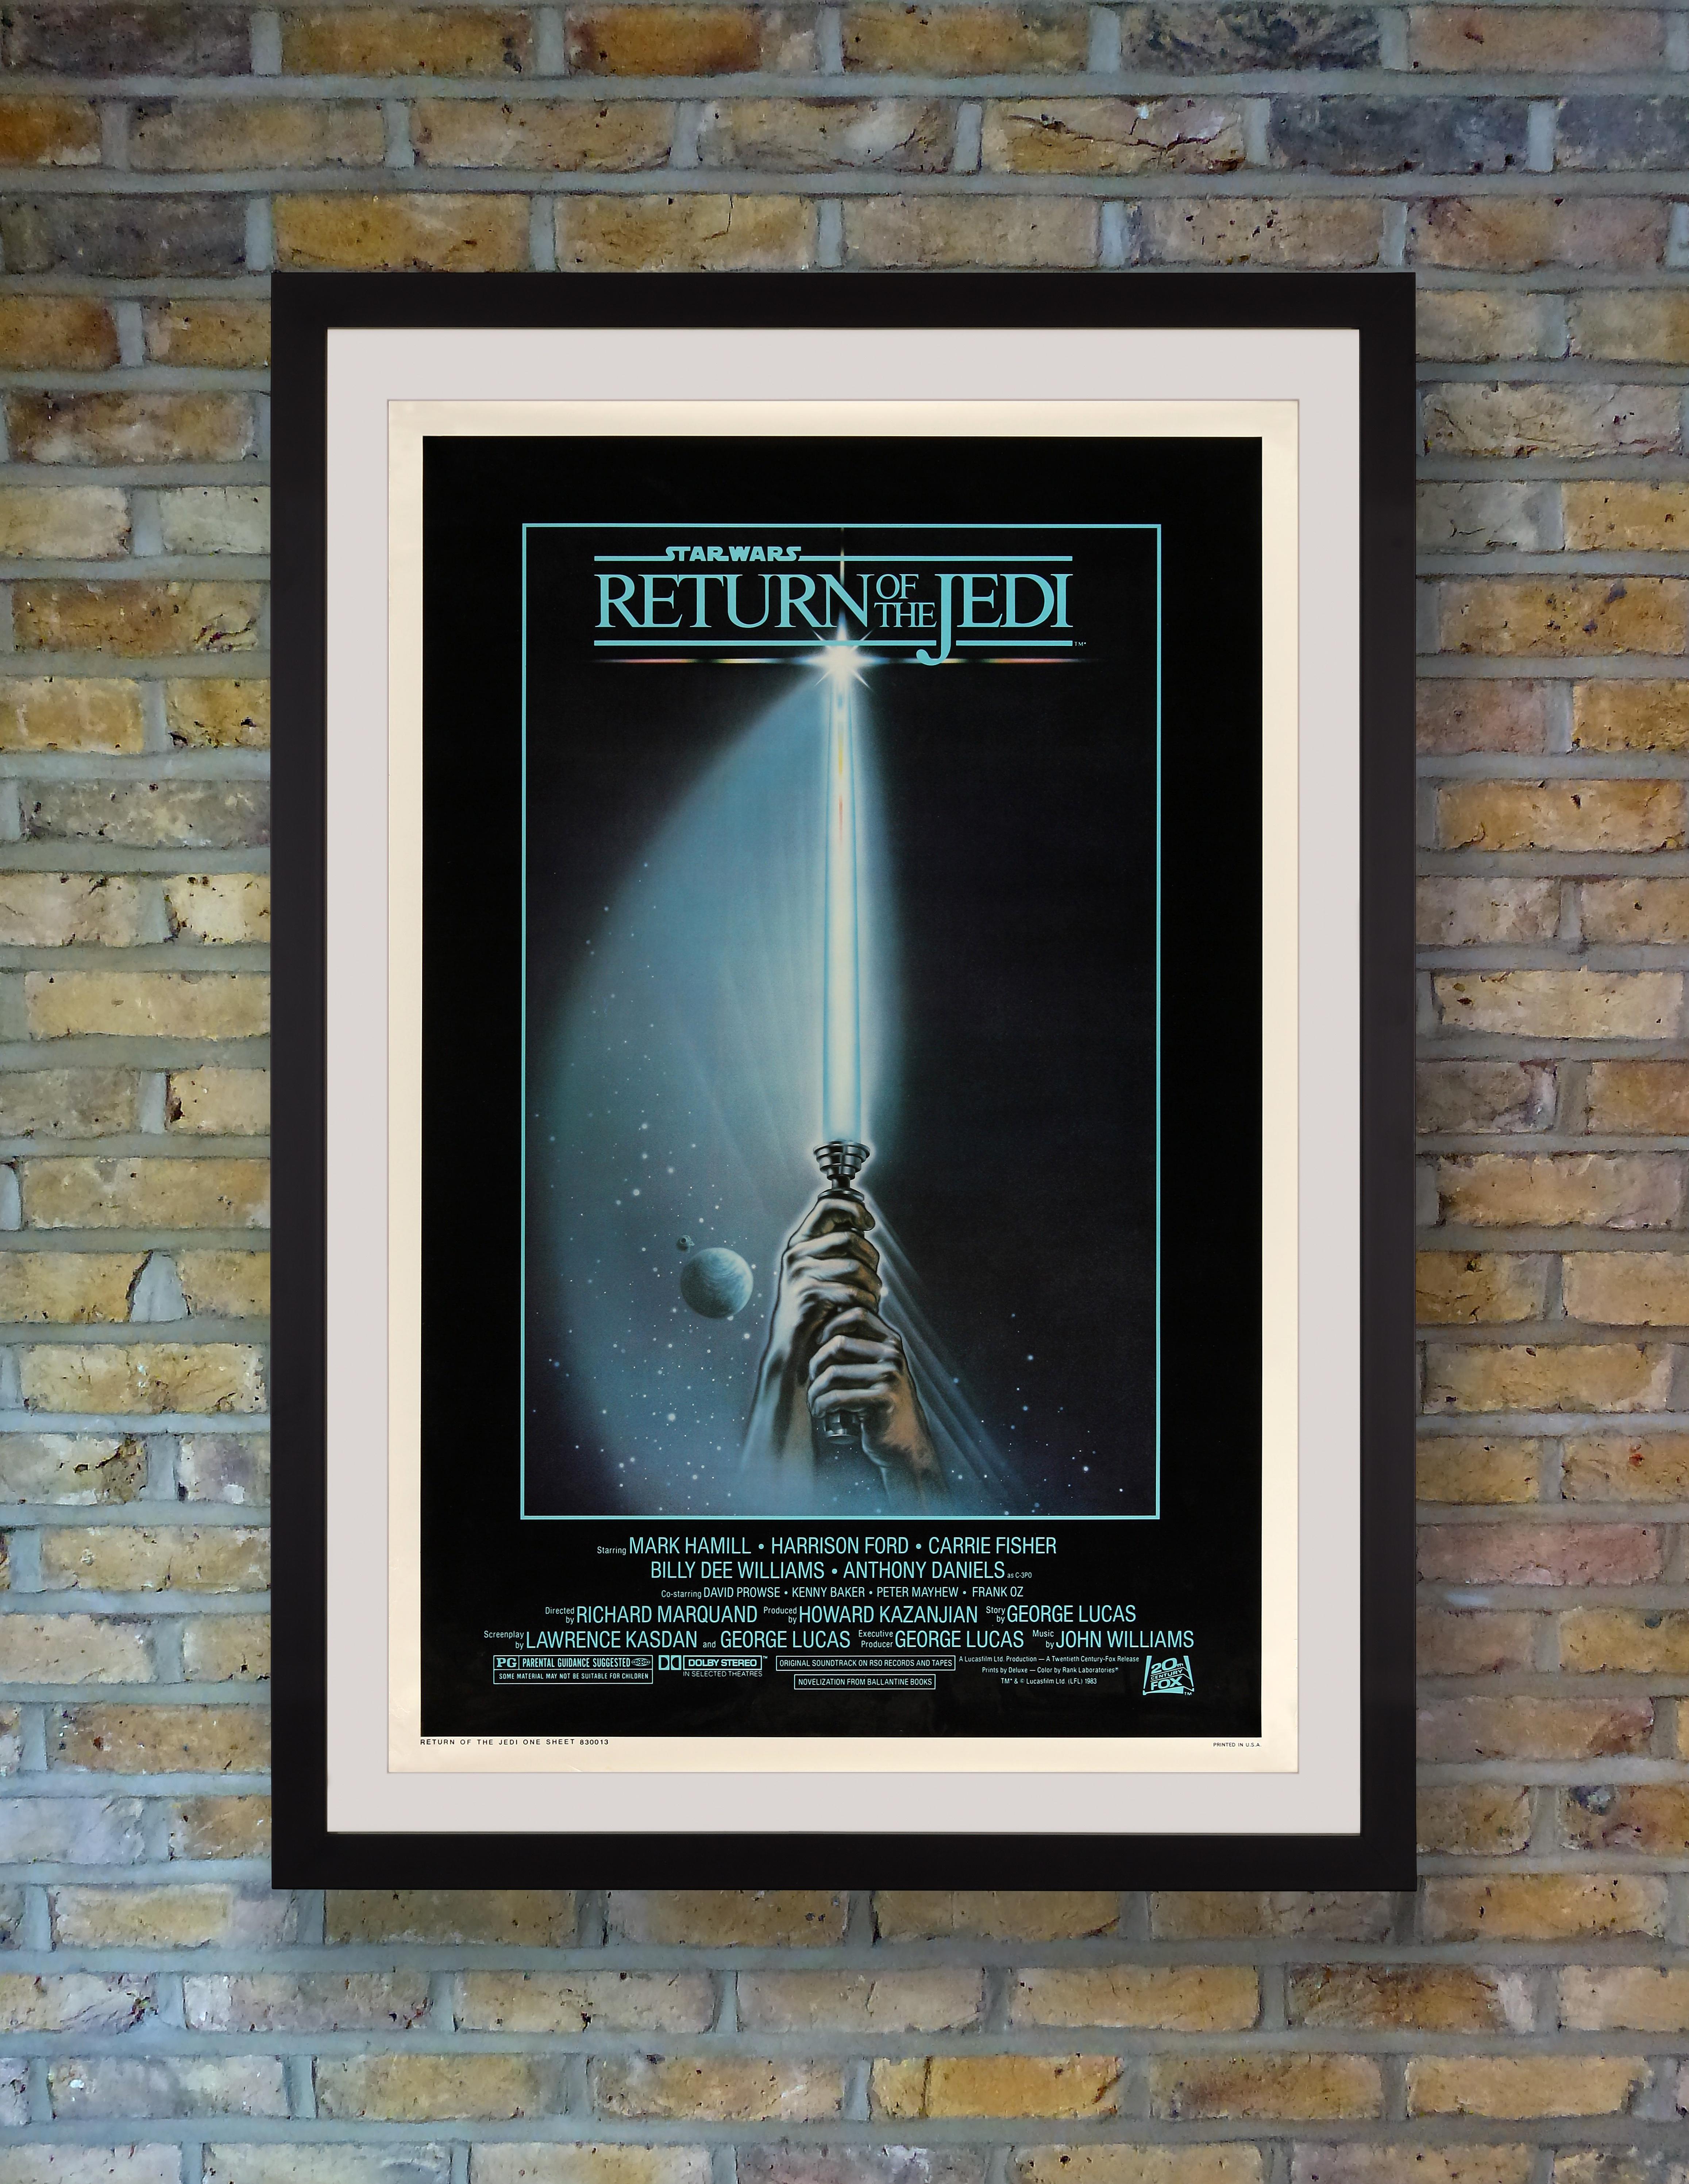 Tim Reamer's simple and effective design for the final installment of George Lucas' original Star Wars trilogy has become emblematic of the entire saga, with it's glowing lightsaber beaming out of the darkness as a symbol of hope against the dark